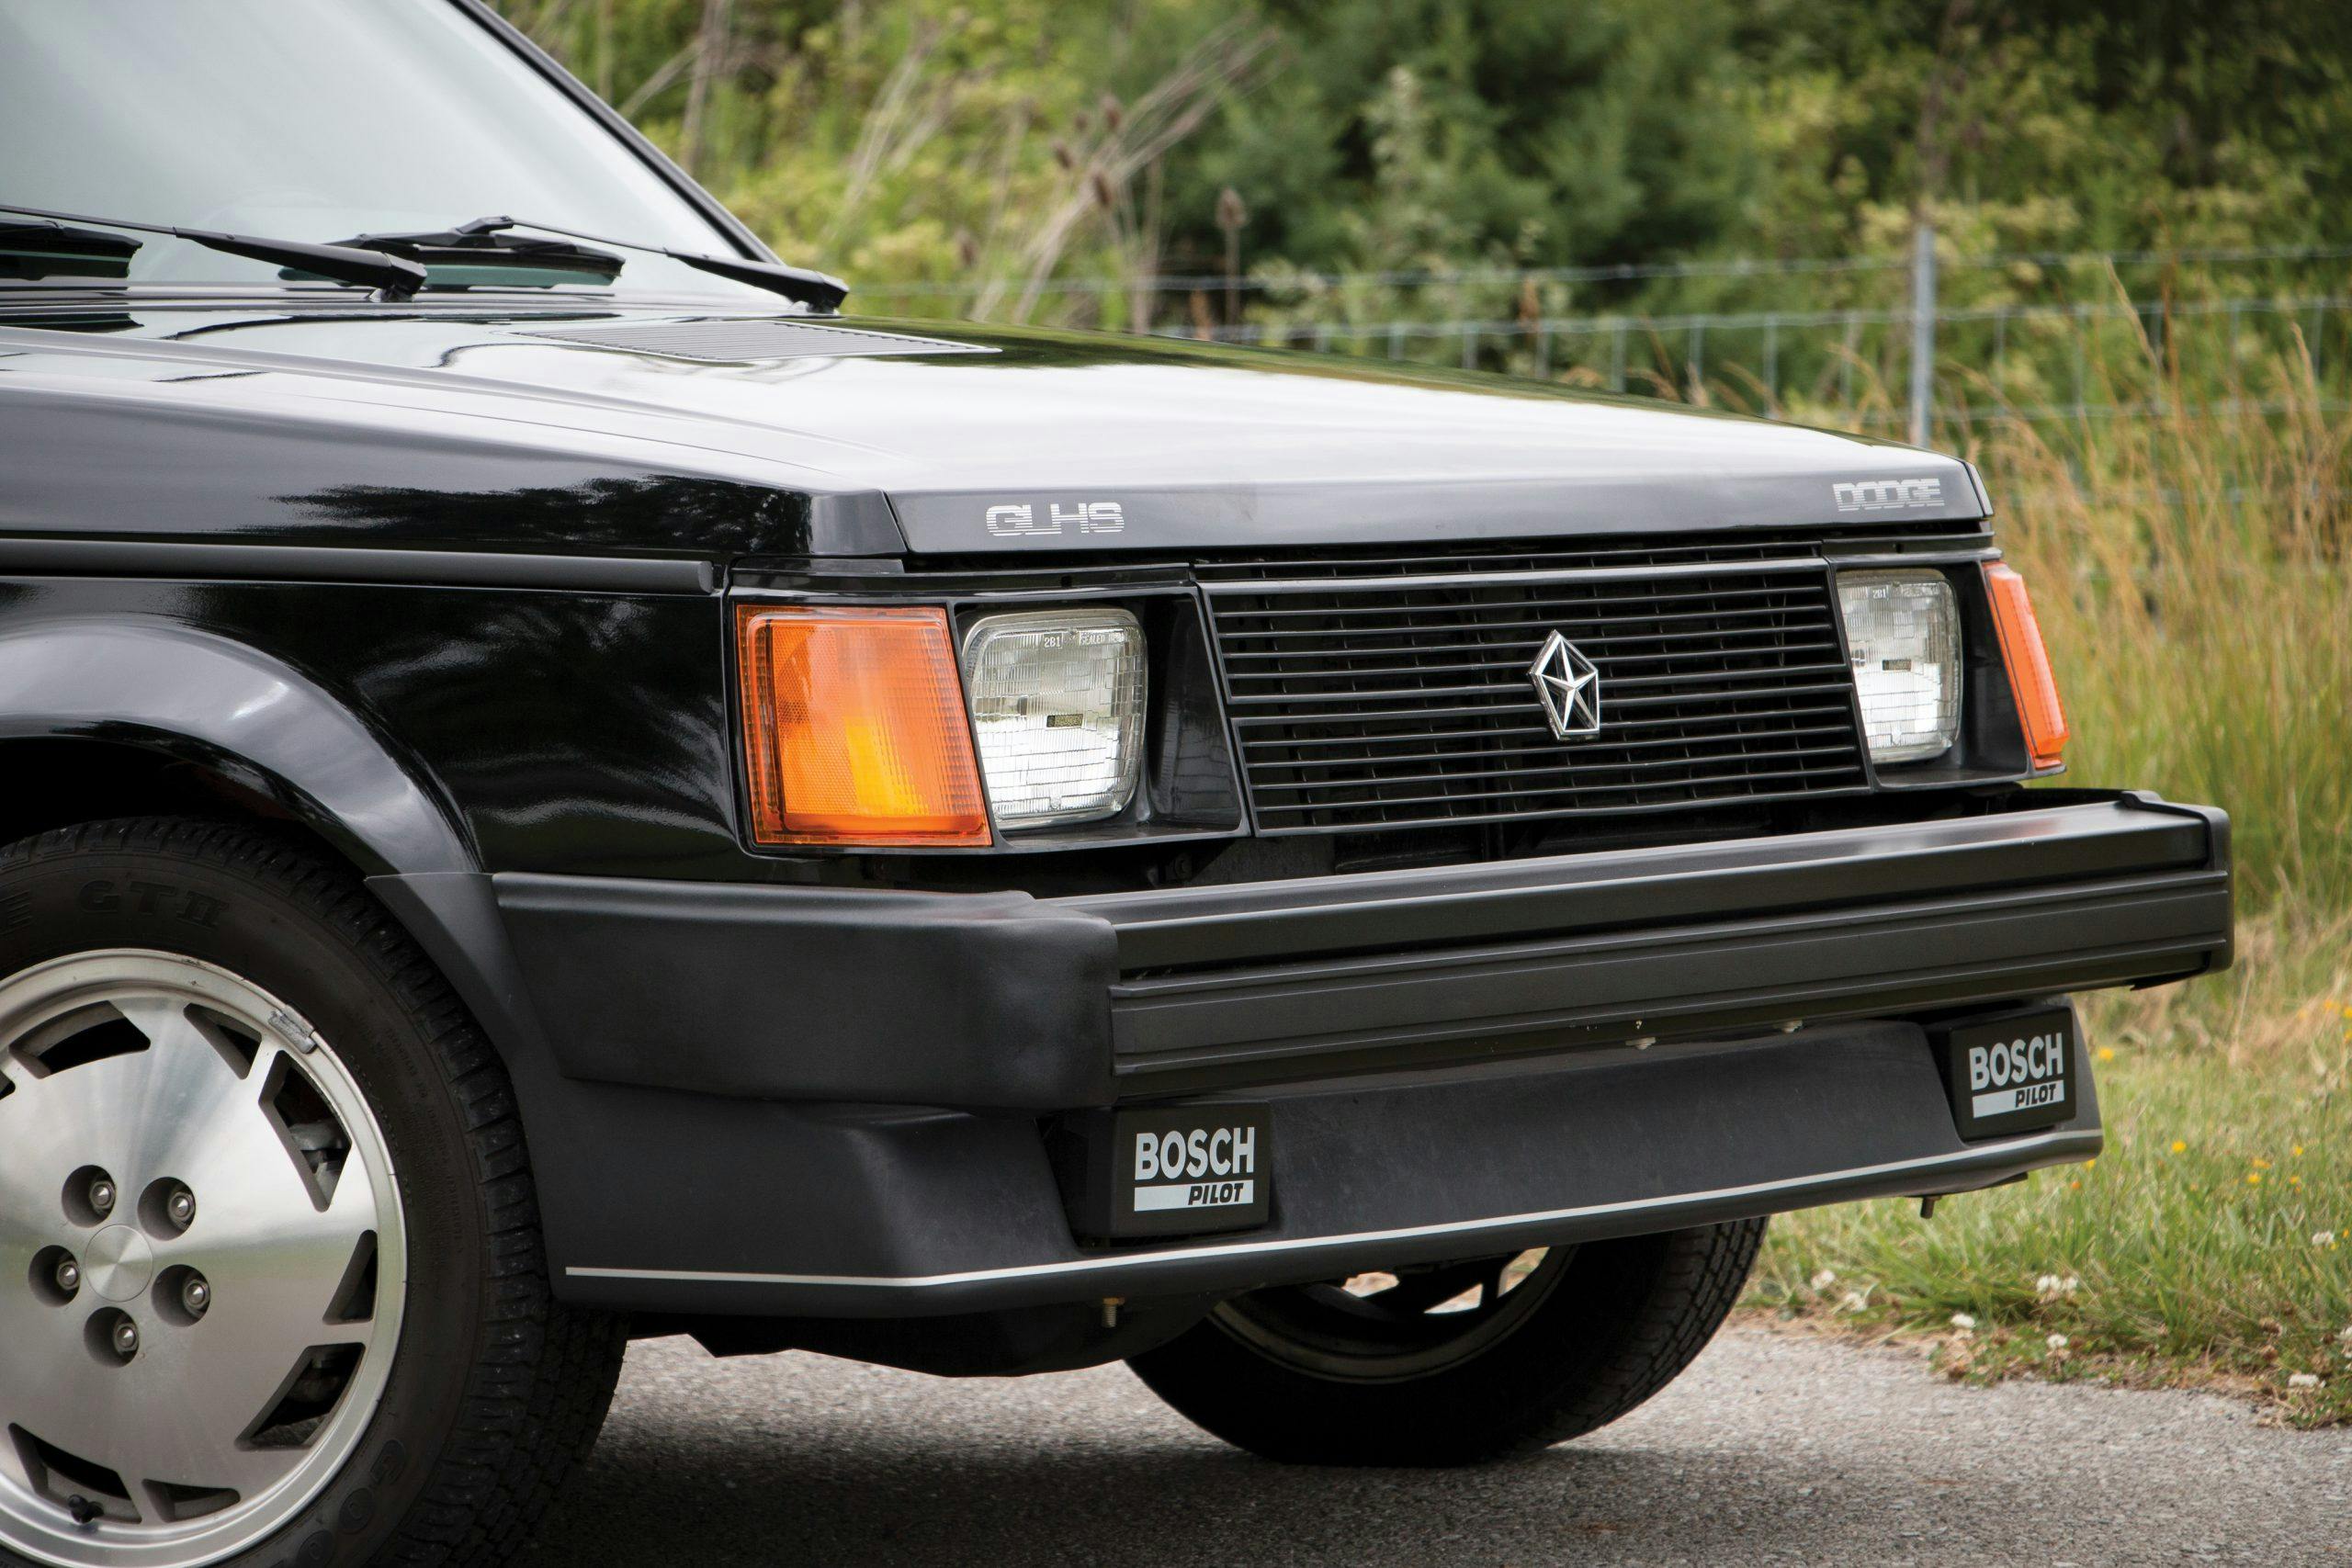 1986 Dodge Shelby Omni GLHS front end